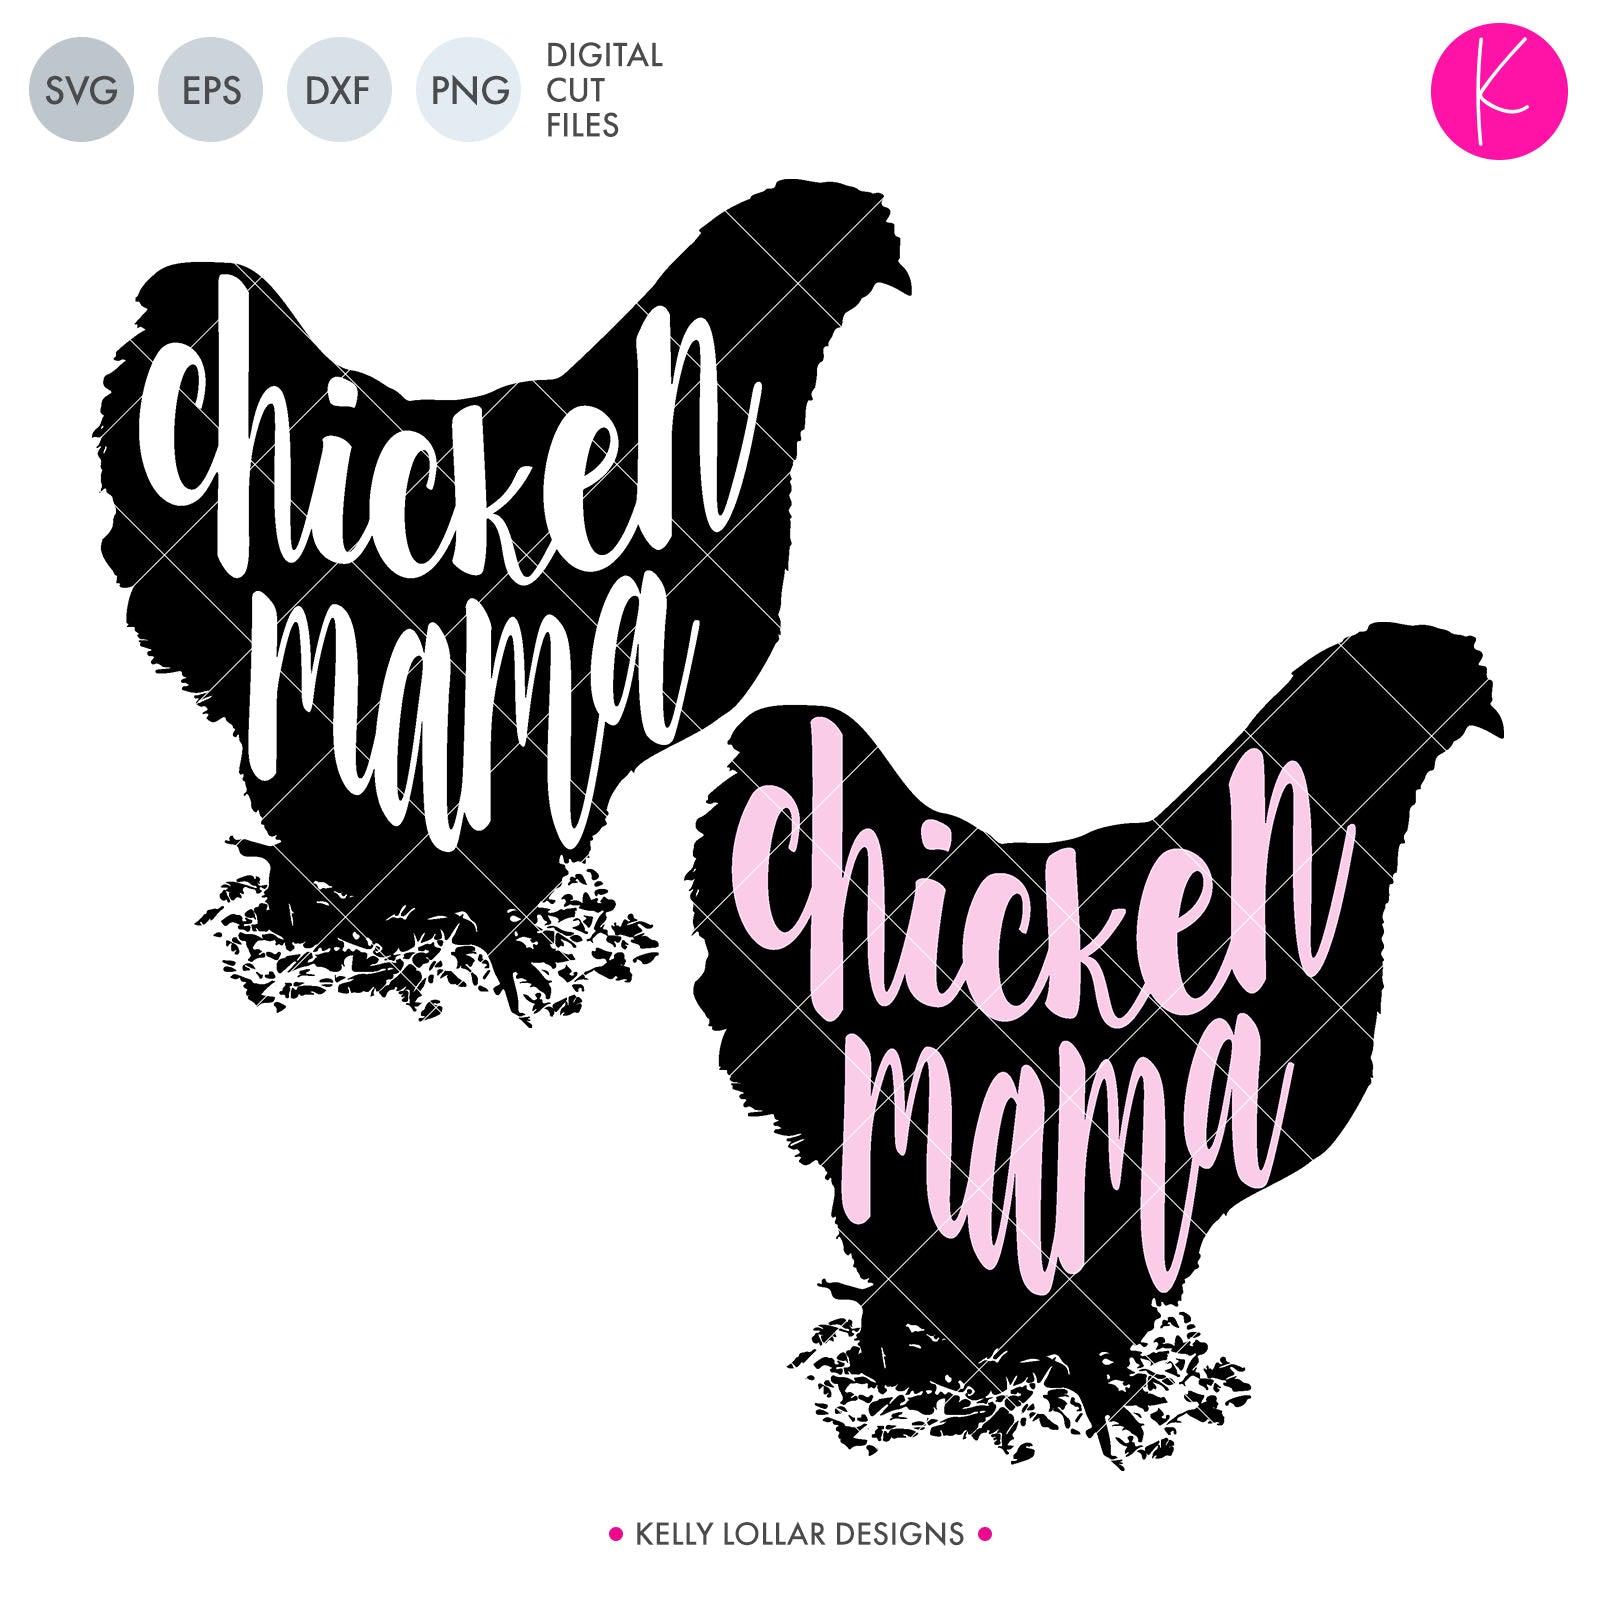 One Lucky Mama SVG CUT FILE Graphic by Design Stock · Creative Fabrica